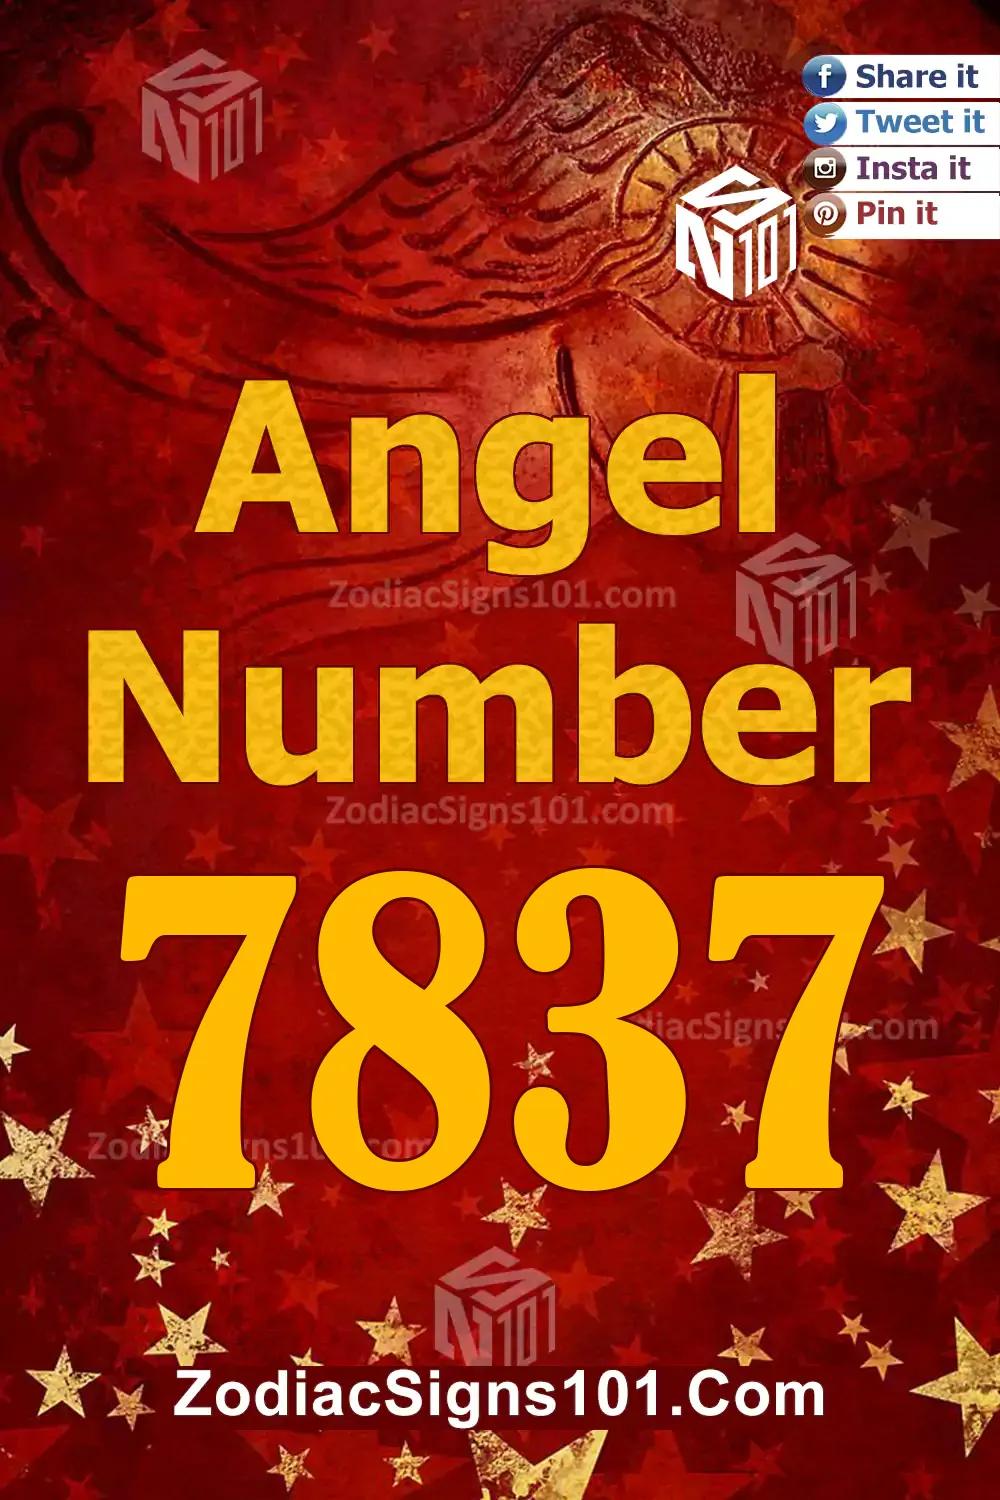 7837 Angel Number Meaning